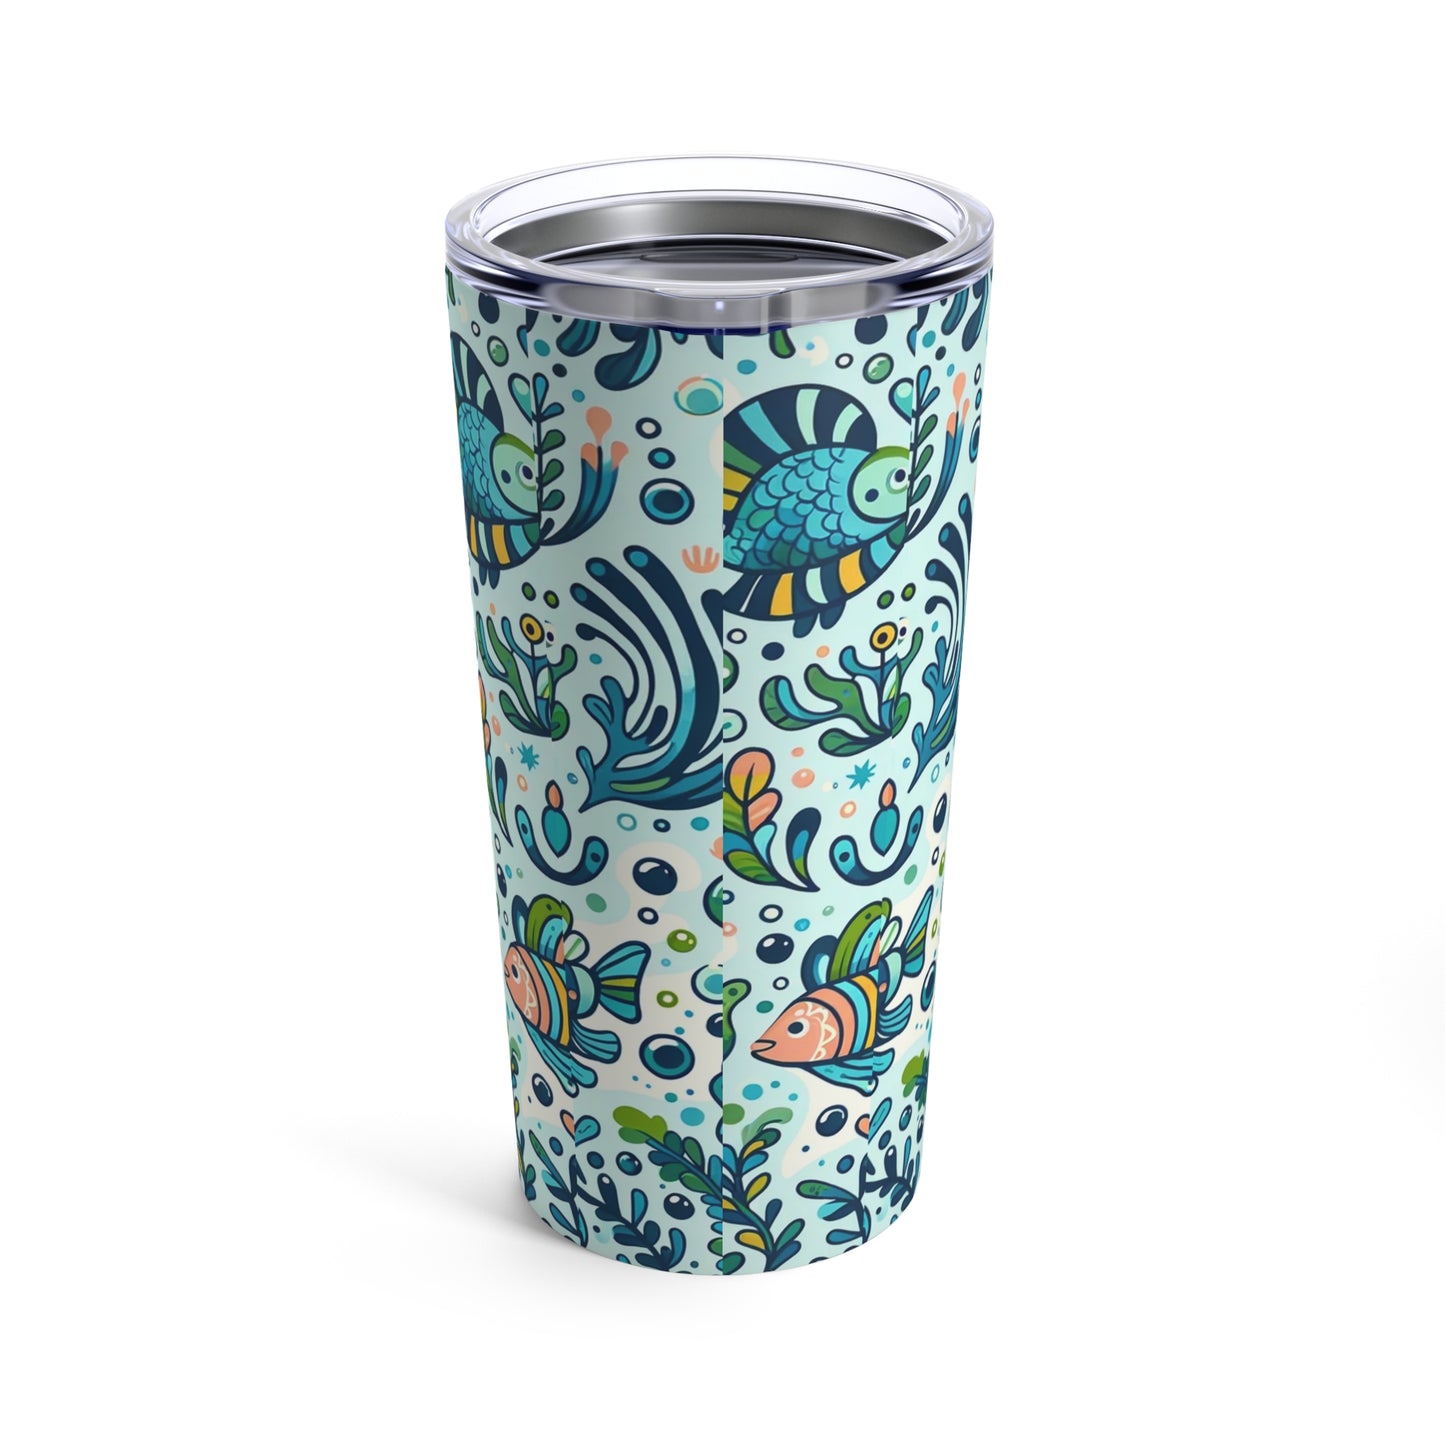 Whimsical Underwater 20oz Tumbler - Playful Ocean Life Design, Colorful and Fun